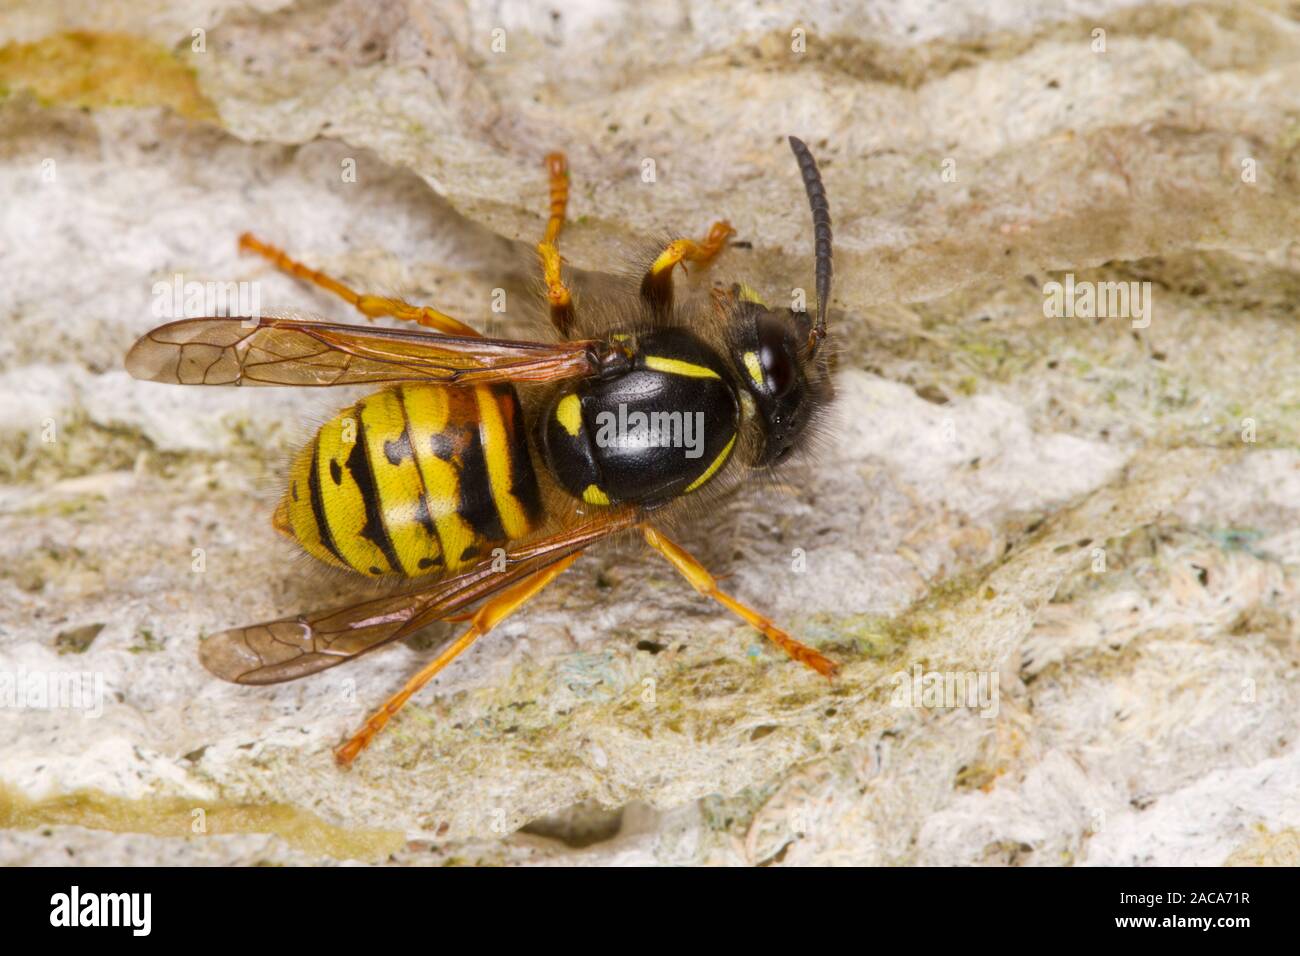 Norwegian wasp (Dolichovespula norwegicus) adult worker enlarging the nest with chewed wood pulp 'paper'. Powys, Wales. June. Stock Photo